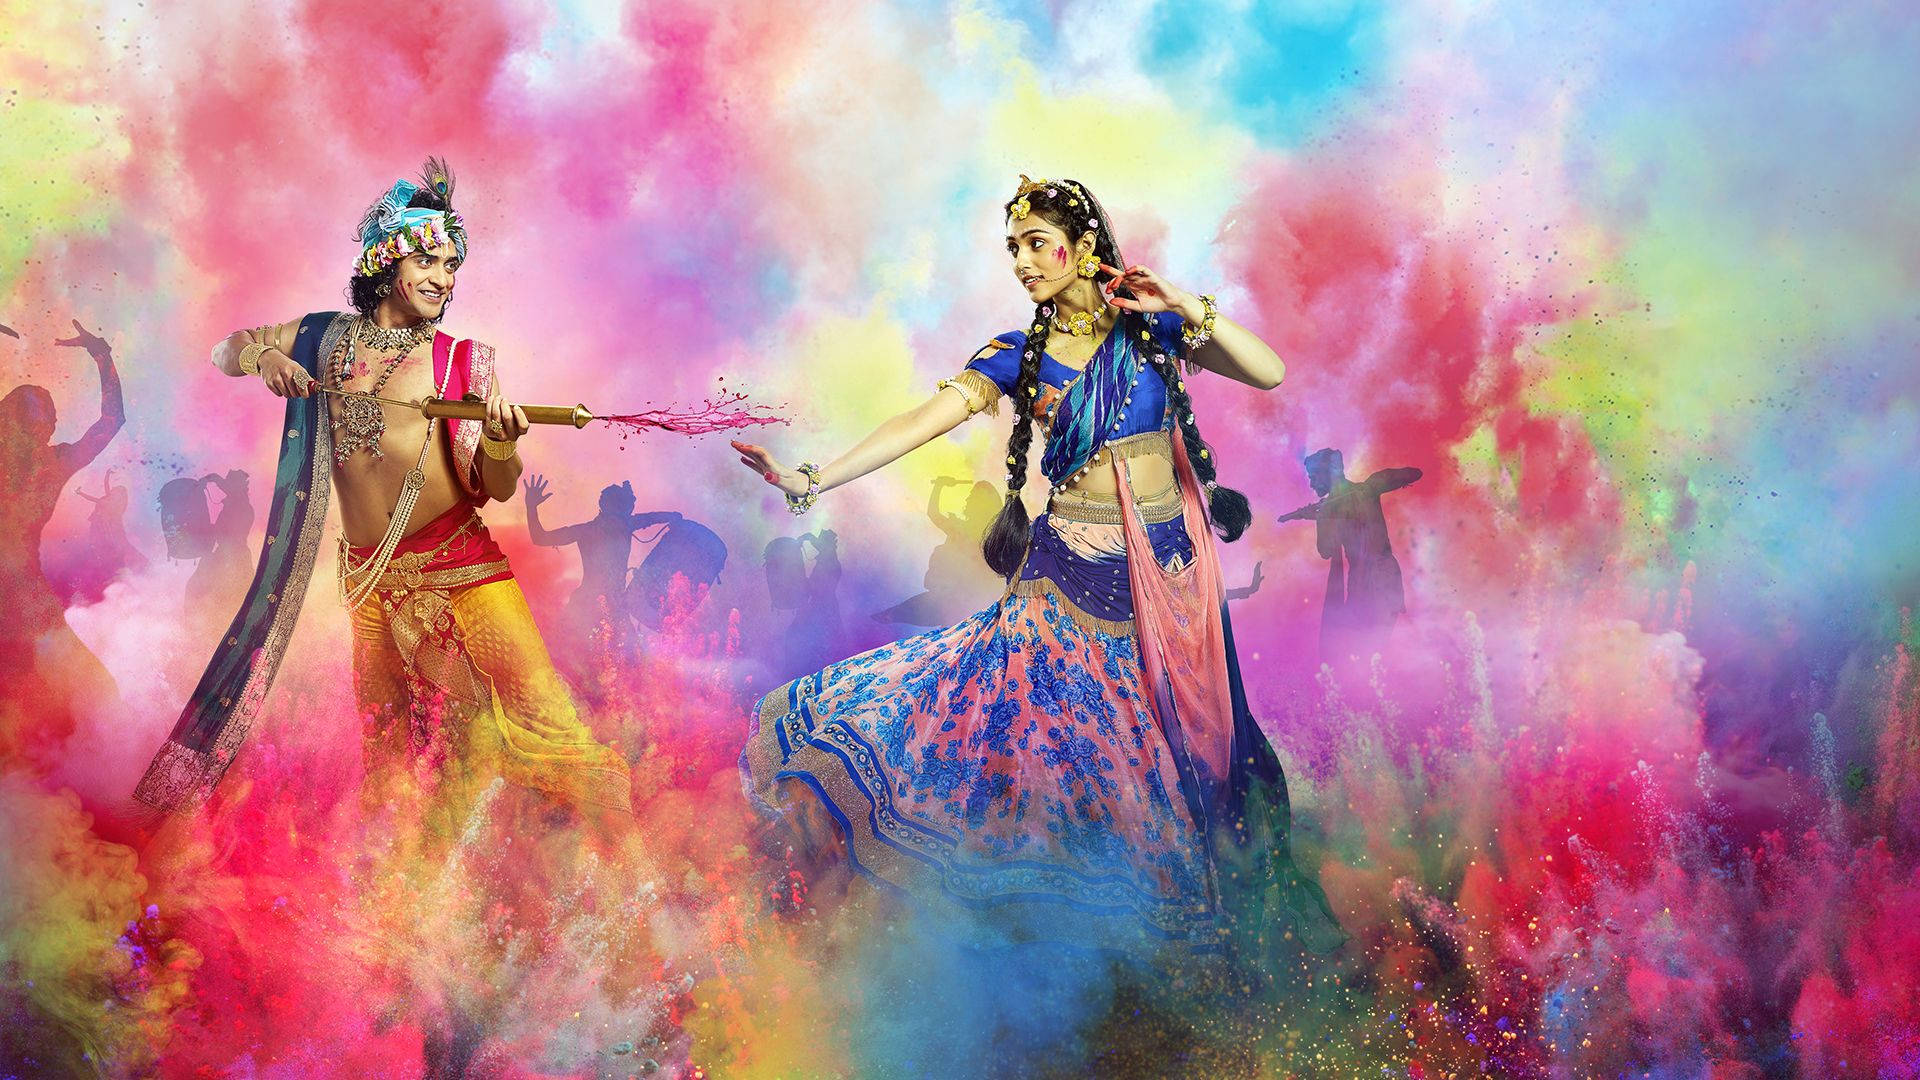 (assuming This Is A Request For A Colorful Wallpaper Related To The Radha Krishna Tv Series) Wallpaper